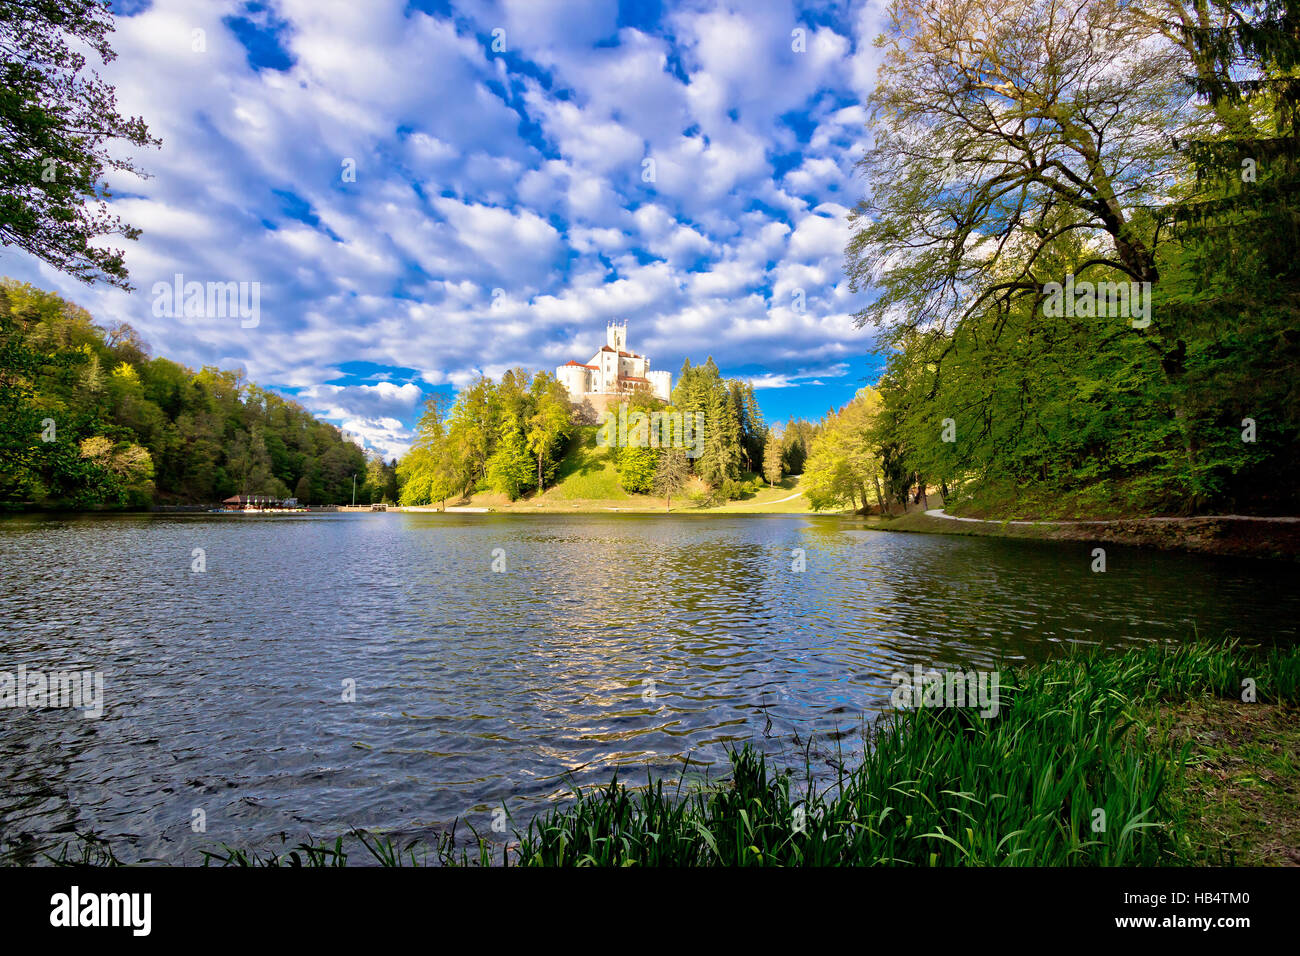 Trakoscan lake and castle on the hill Stock Photo